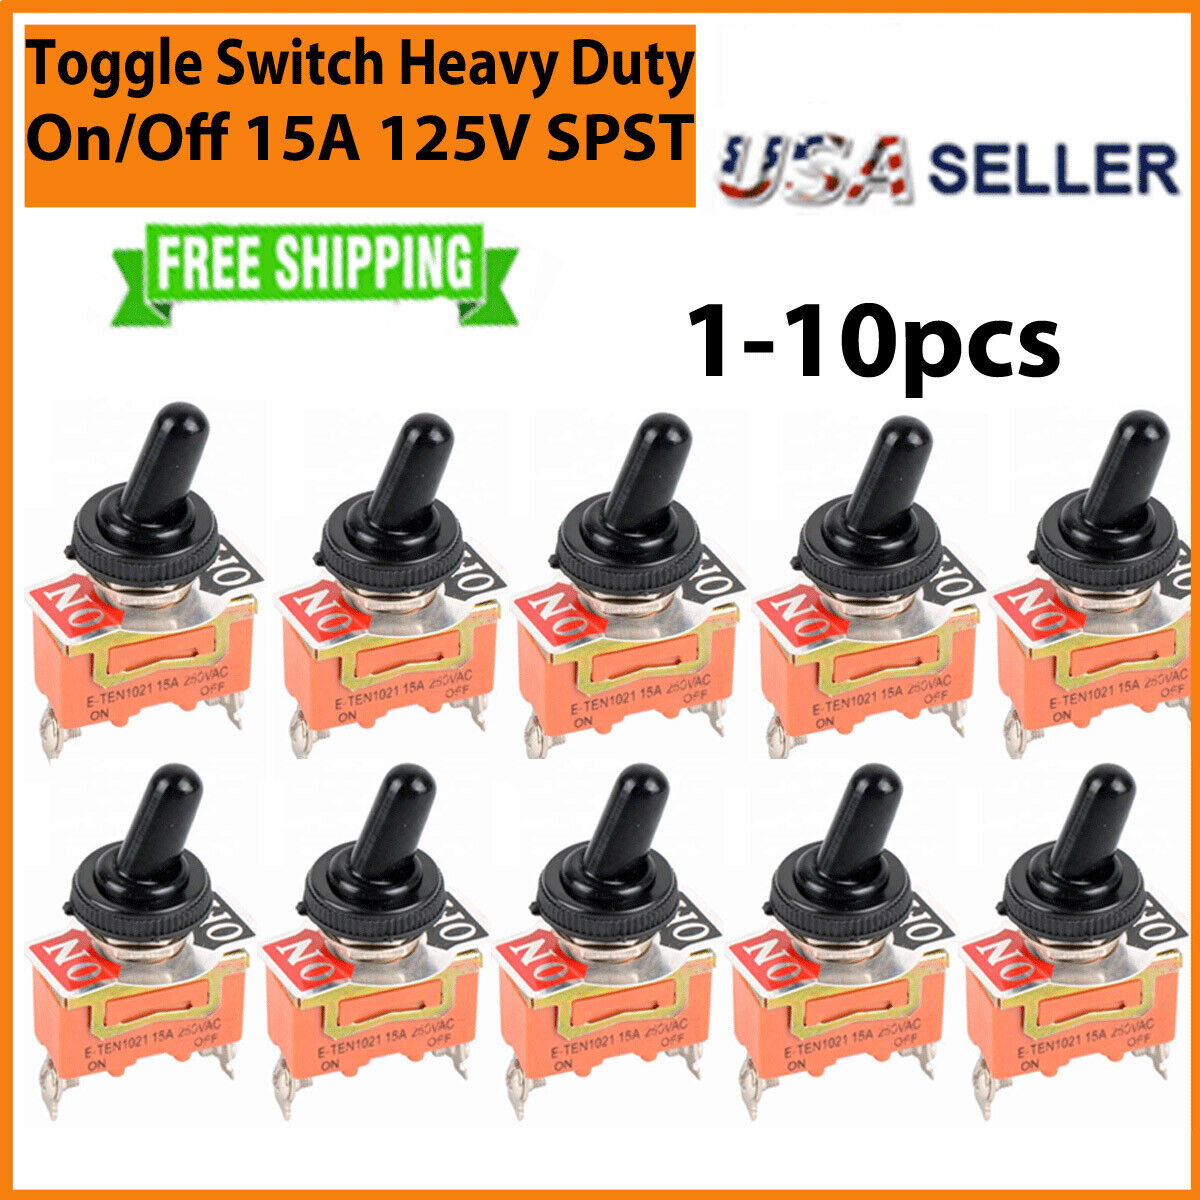 Toggle SWITCH ON/OFF Heavy Duty 15A 125V SPST 2 Terminal Car ATV Waterproof 1-10